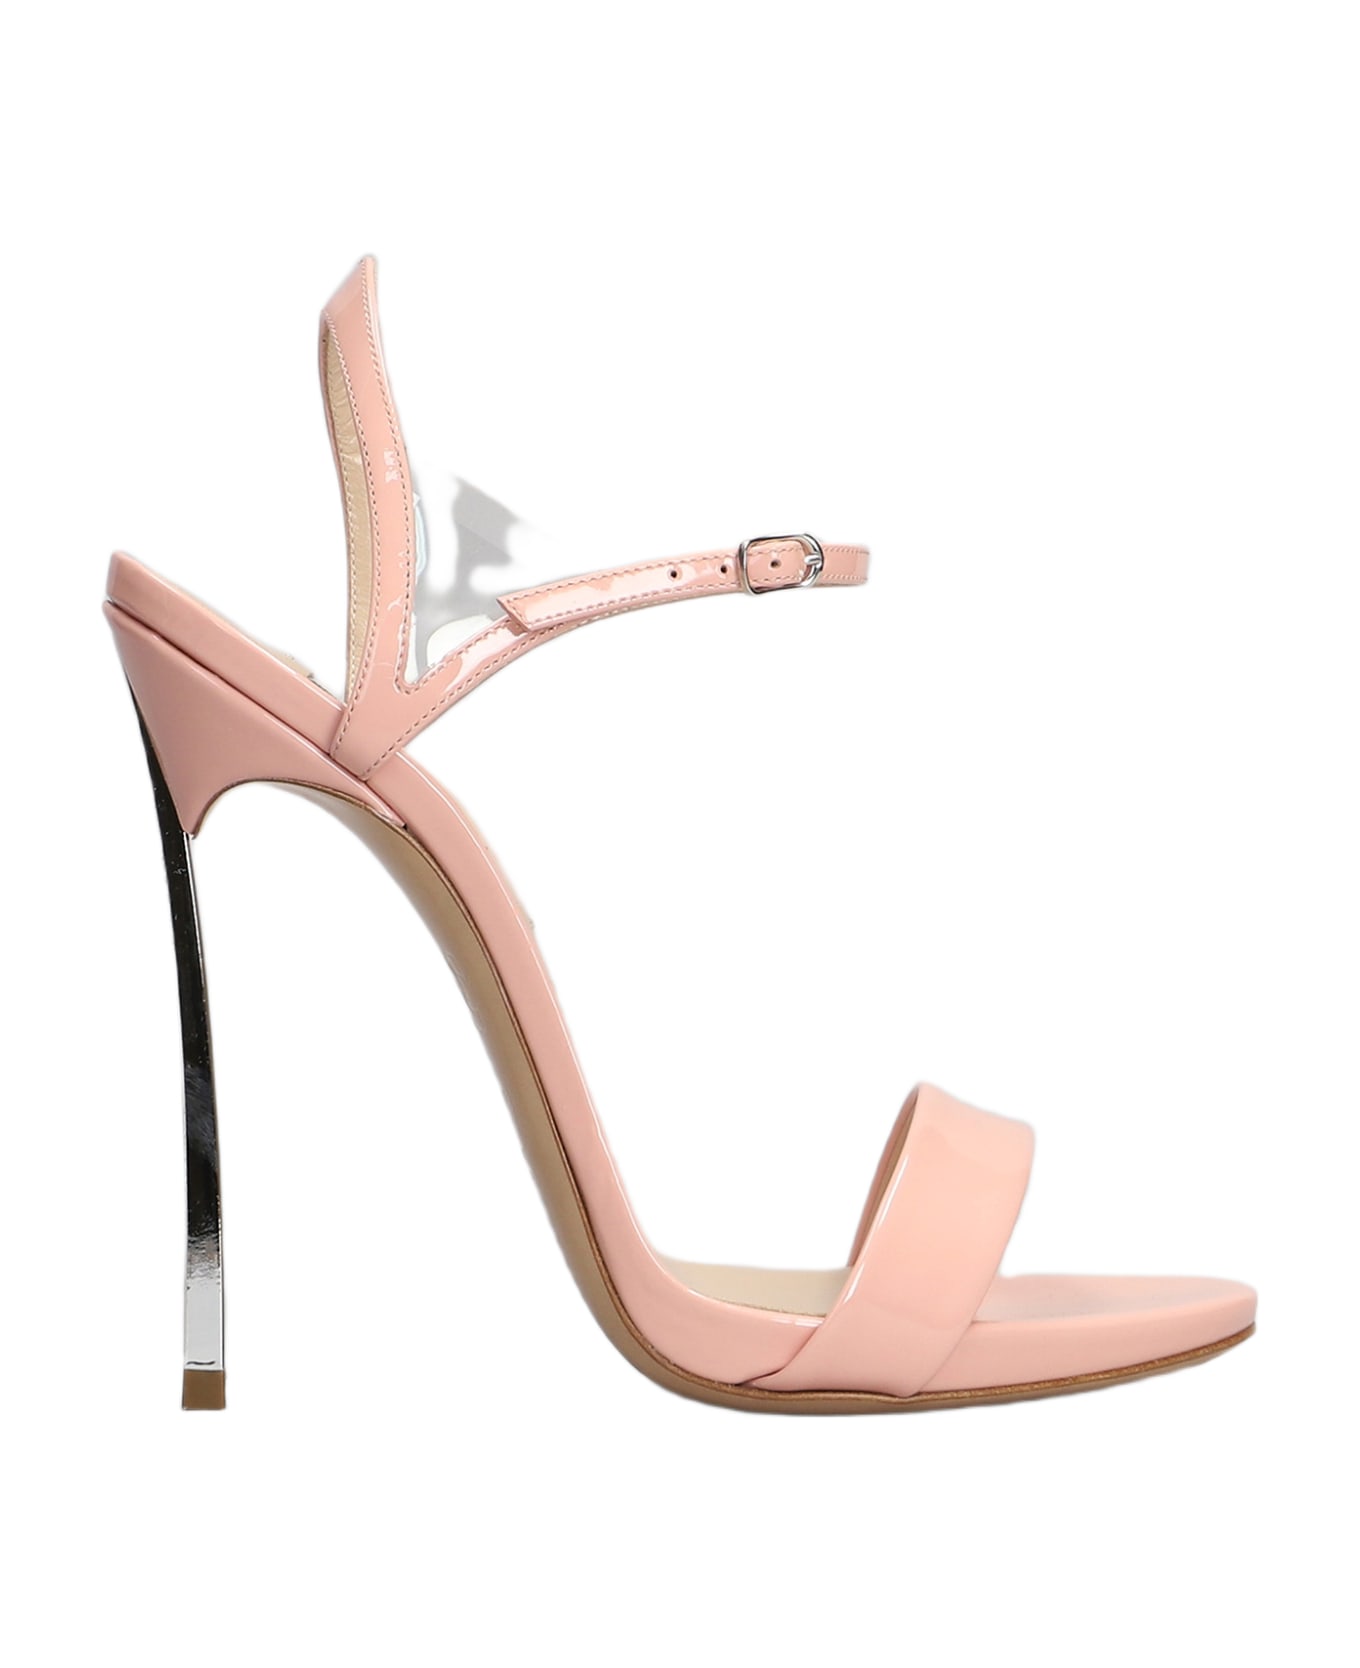 Casadei Sandals In Rose-pink Patent Leather - rose-pink サンダル